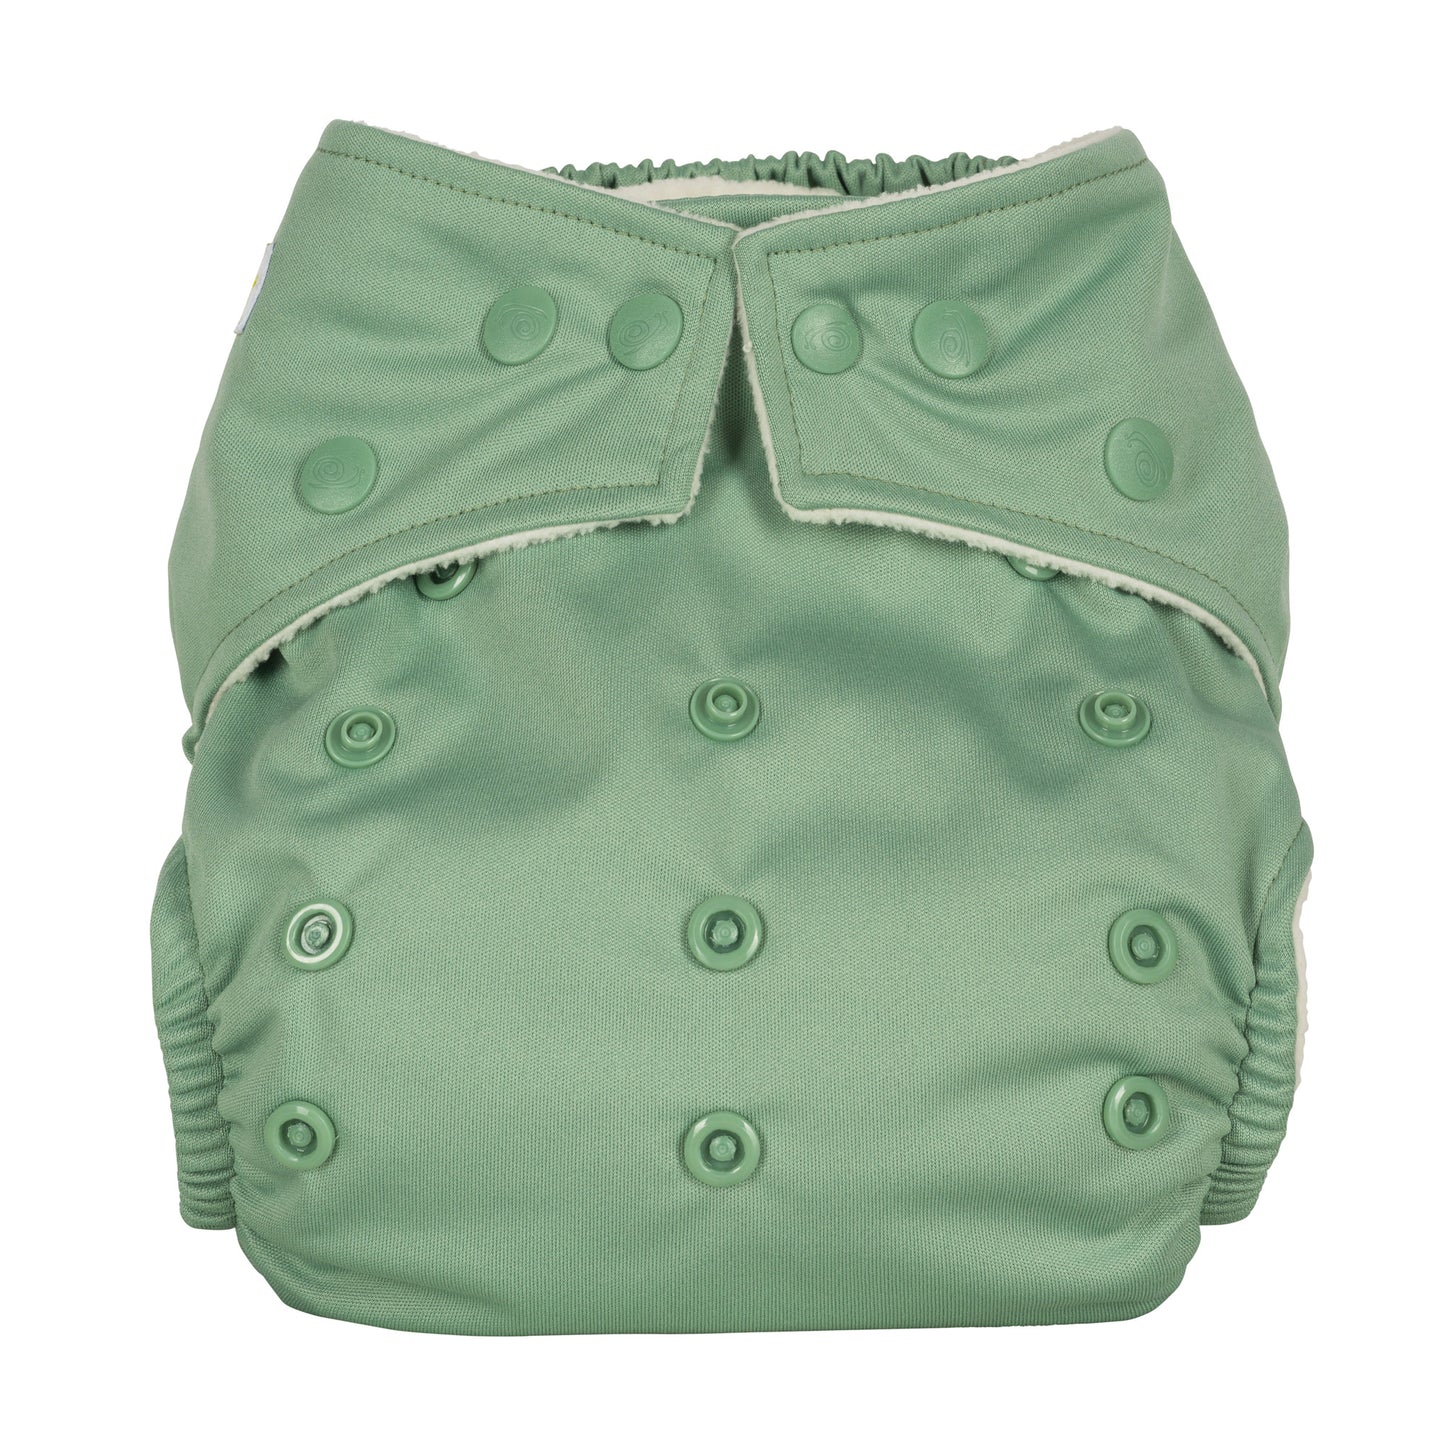 Green Plain One Size Sage Reusable Cloth Nappy